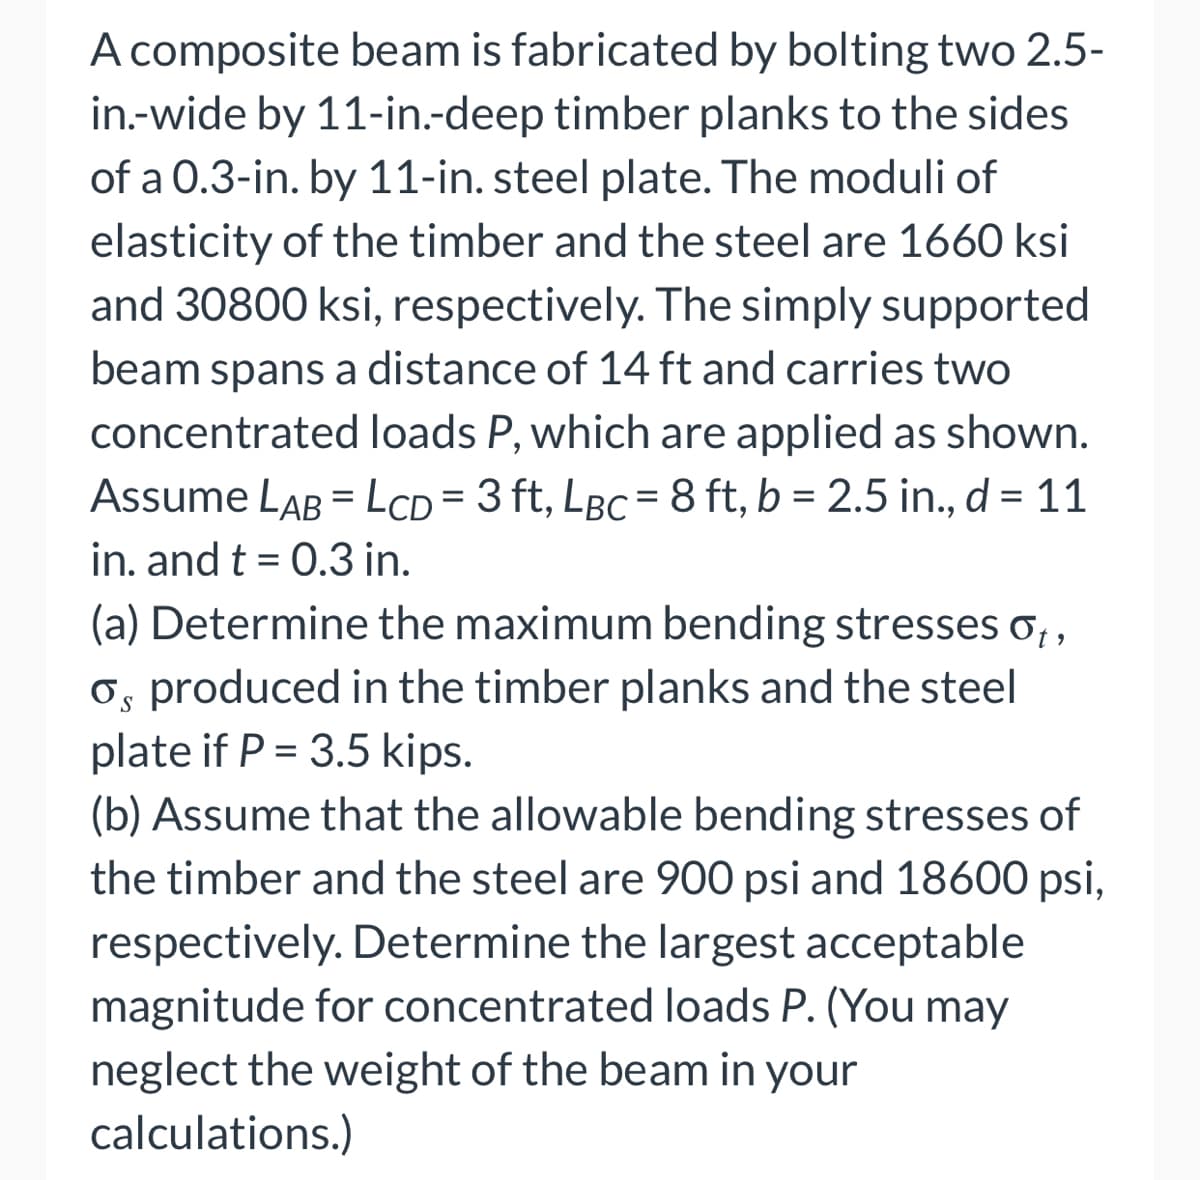 A composite beam is fabricated by bolting two 2.5-
in.-wide by 11-in.-deep timber planks to the sides
of a 0.3-in. by 11-in. steel plate. The moduli of
elasticity of the timber and the steel are 1660 ksi
and 30800 ksi, respectively. The simply supported
beam spans a distance of 14 ft and carries two
concentrated loads P, which are applied as shown.
Assume LAB = LCD= 3 ft, LBC = 8 ft, b = 2.5 in., d = 11
in. and t = 0.3 in.
(a) Determine the maximum bending stresses ₁,
os produced in the timber planks and the steel
plate if P = 3.5 kips.
(b) Assume that the allowable bending stresses of
the timber and the steel are 900 psi and 18600 psi,
respectively. Determine the largest acceptable
magnitude for concentrated loads P. (You may
neglect the weight of the beam in your
calculations.)